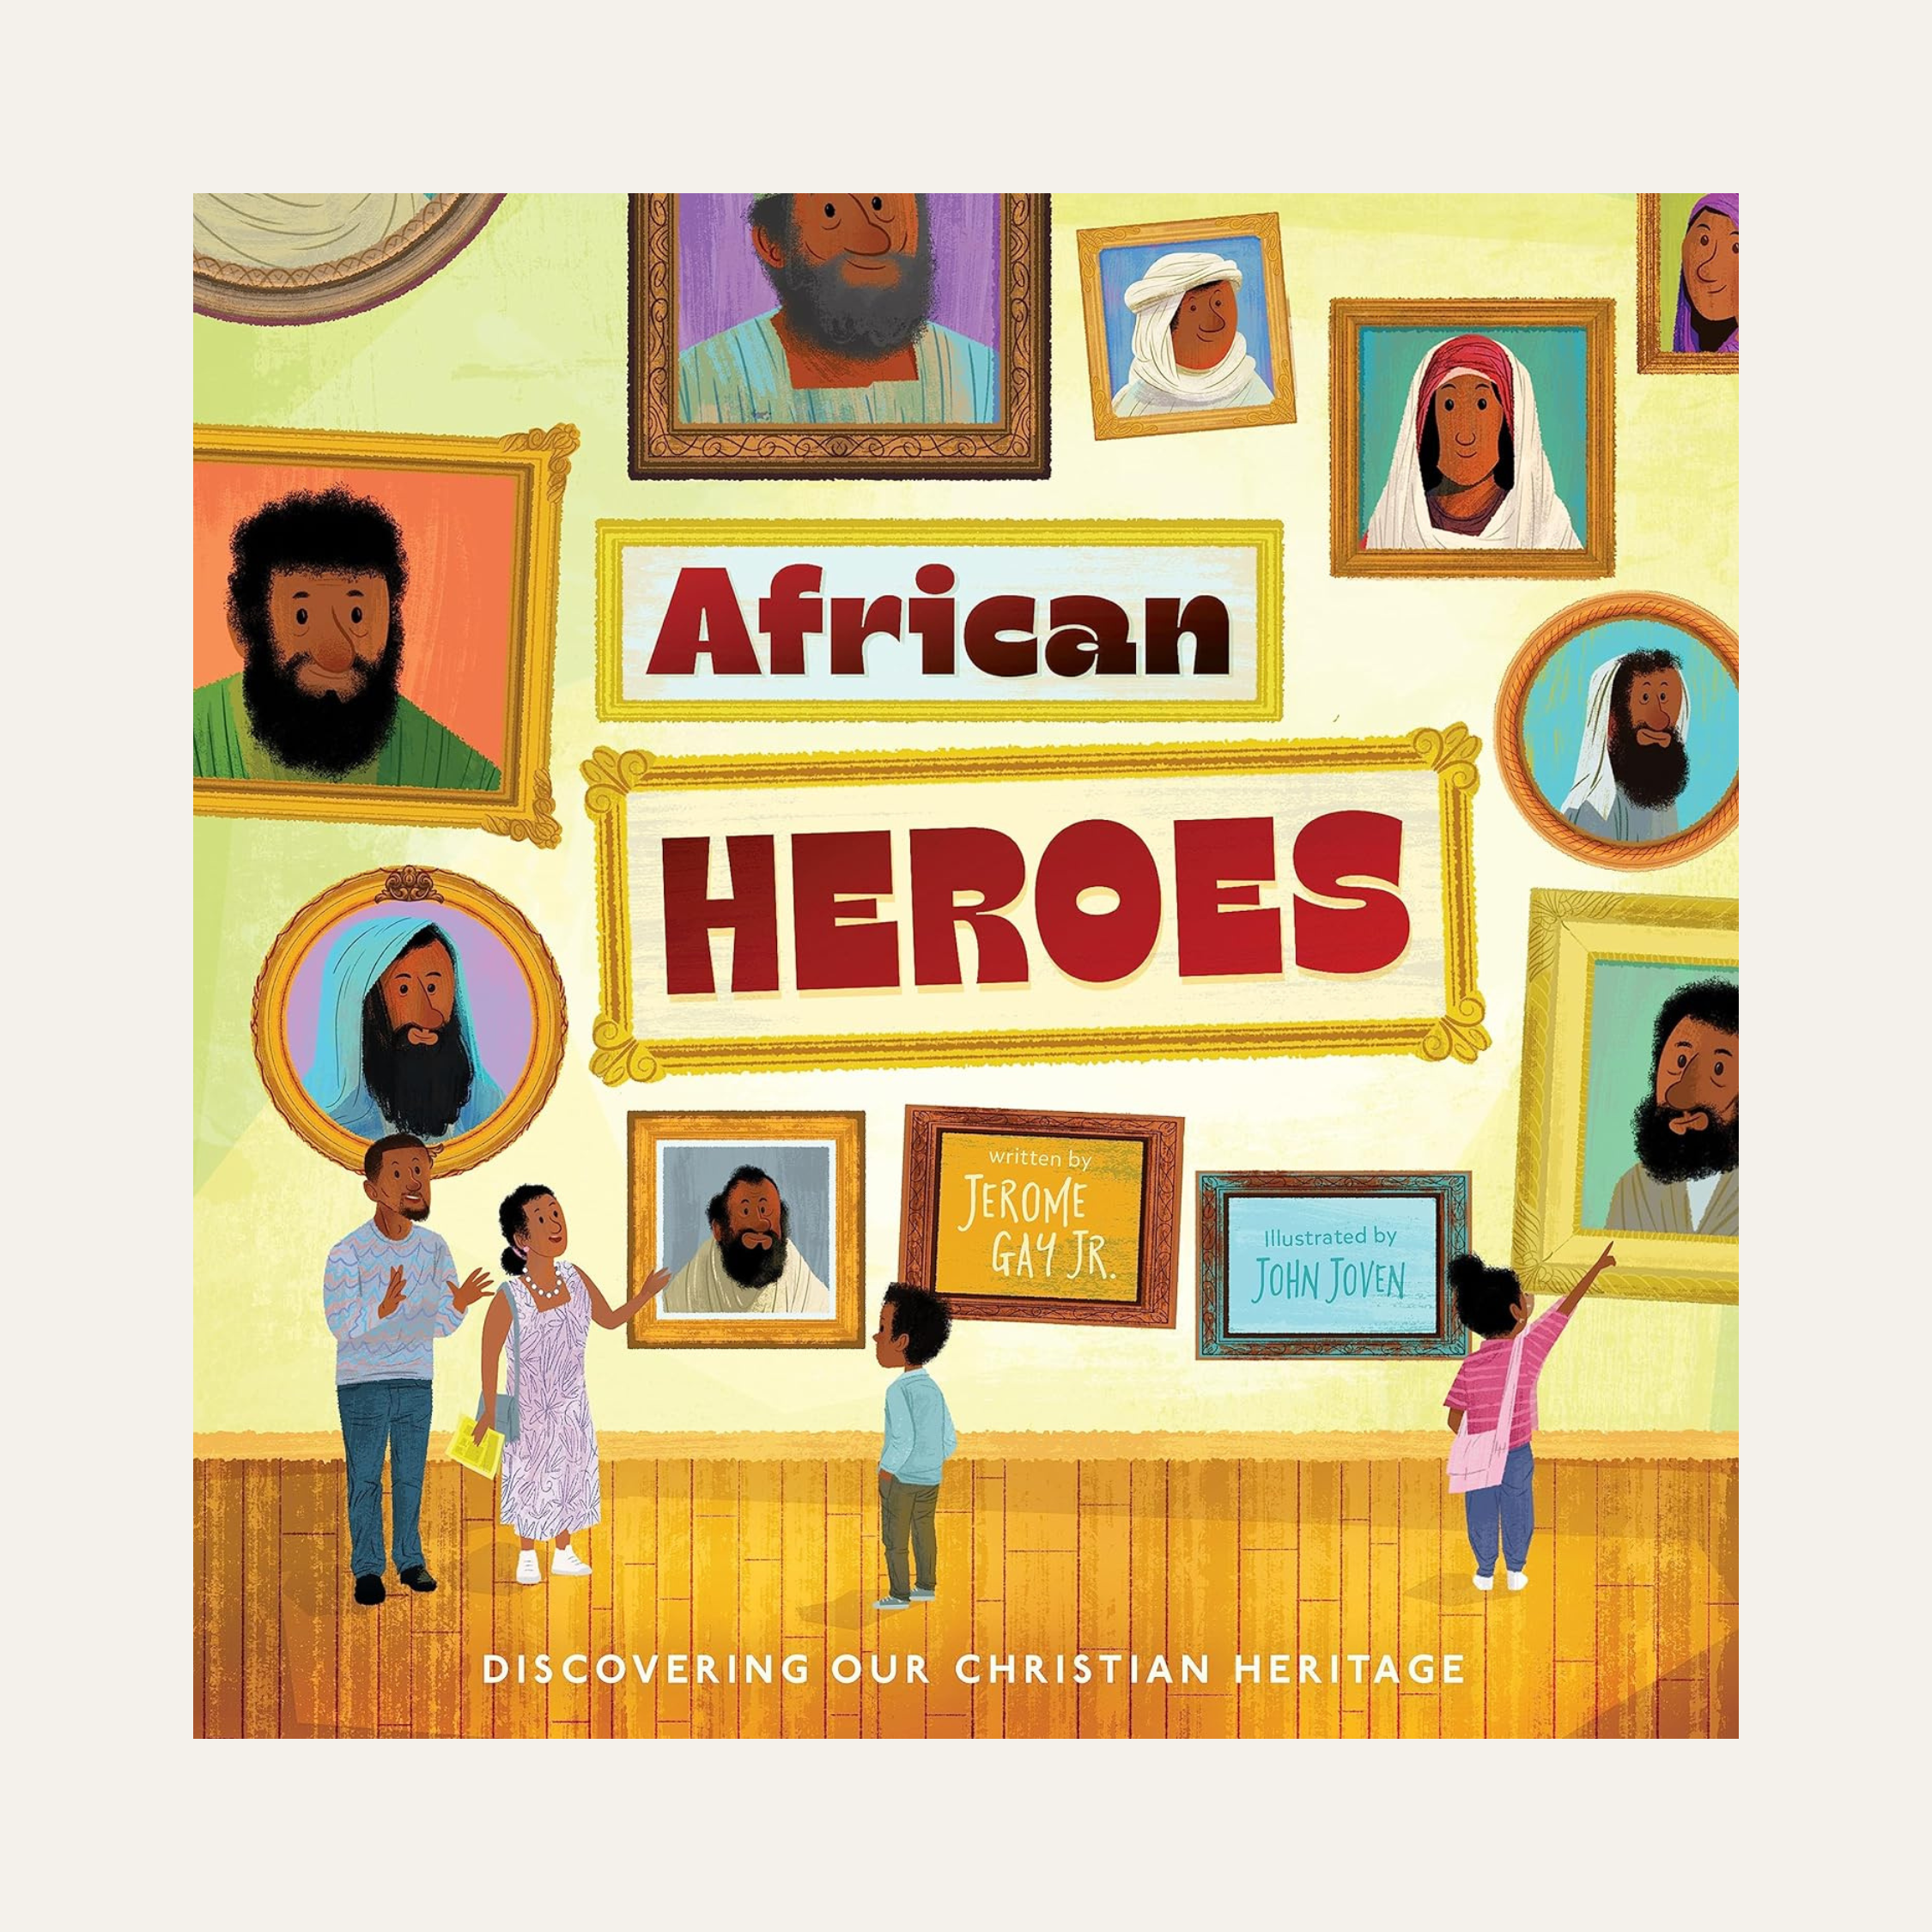 African Heroes: Discovering Our Christian Heritage by Jerome Gay